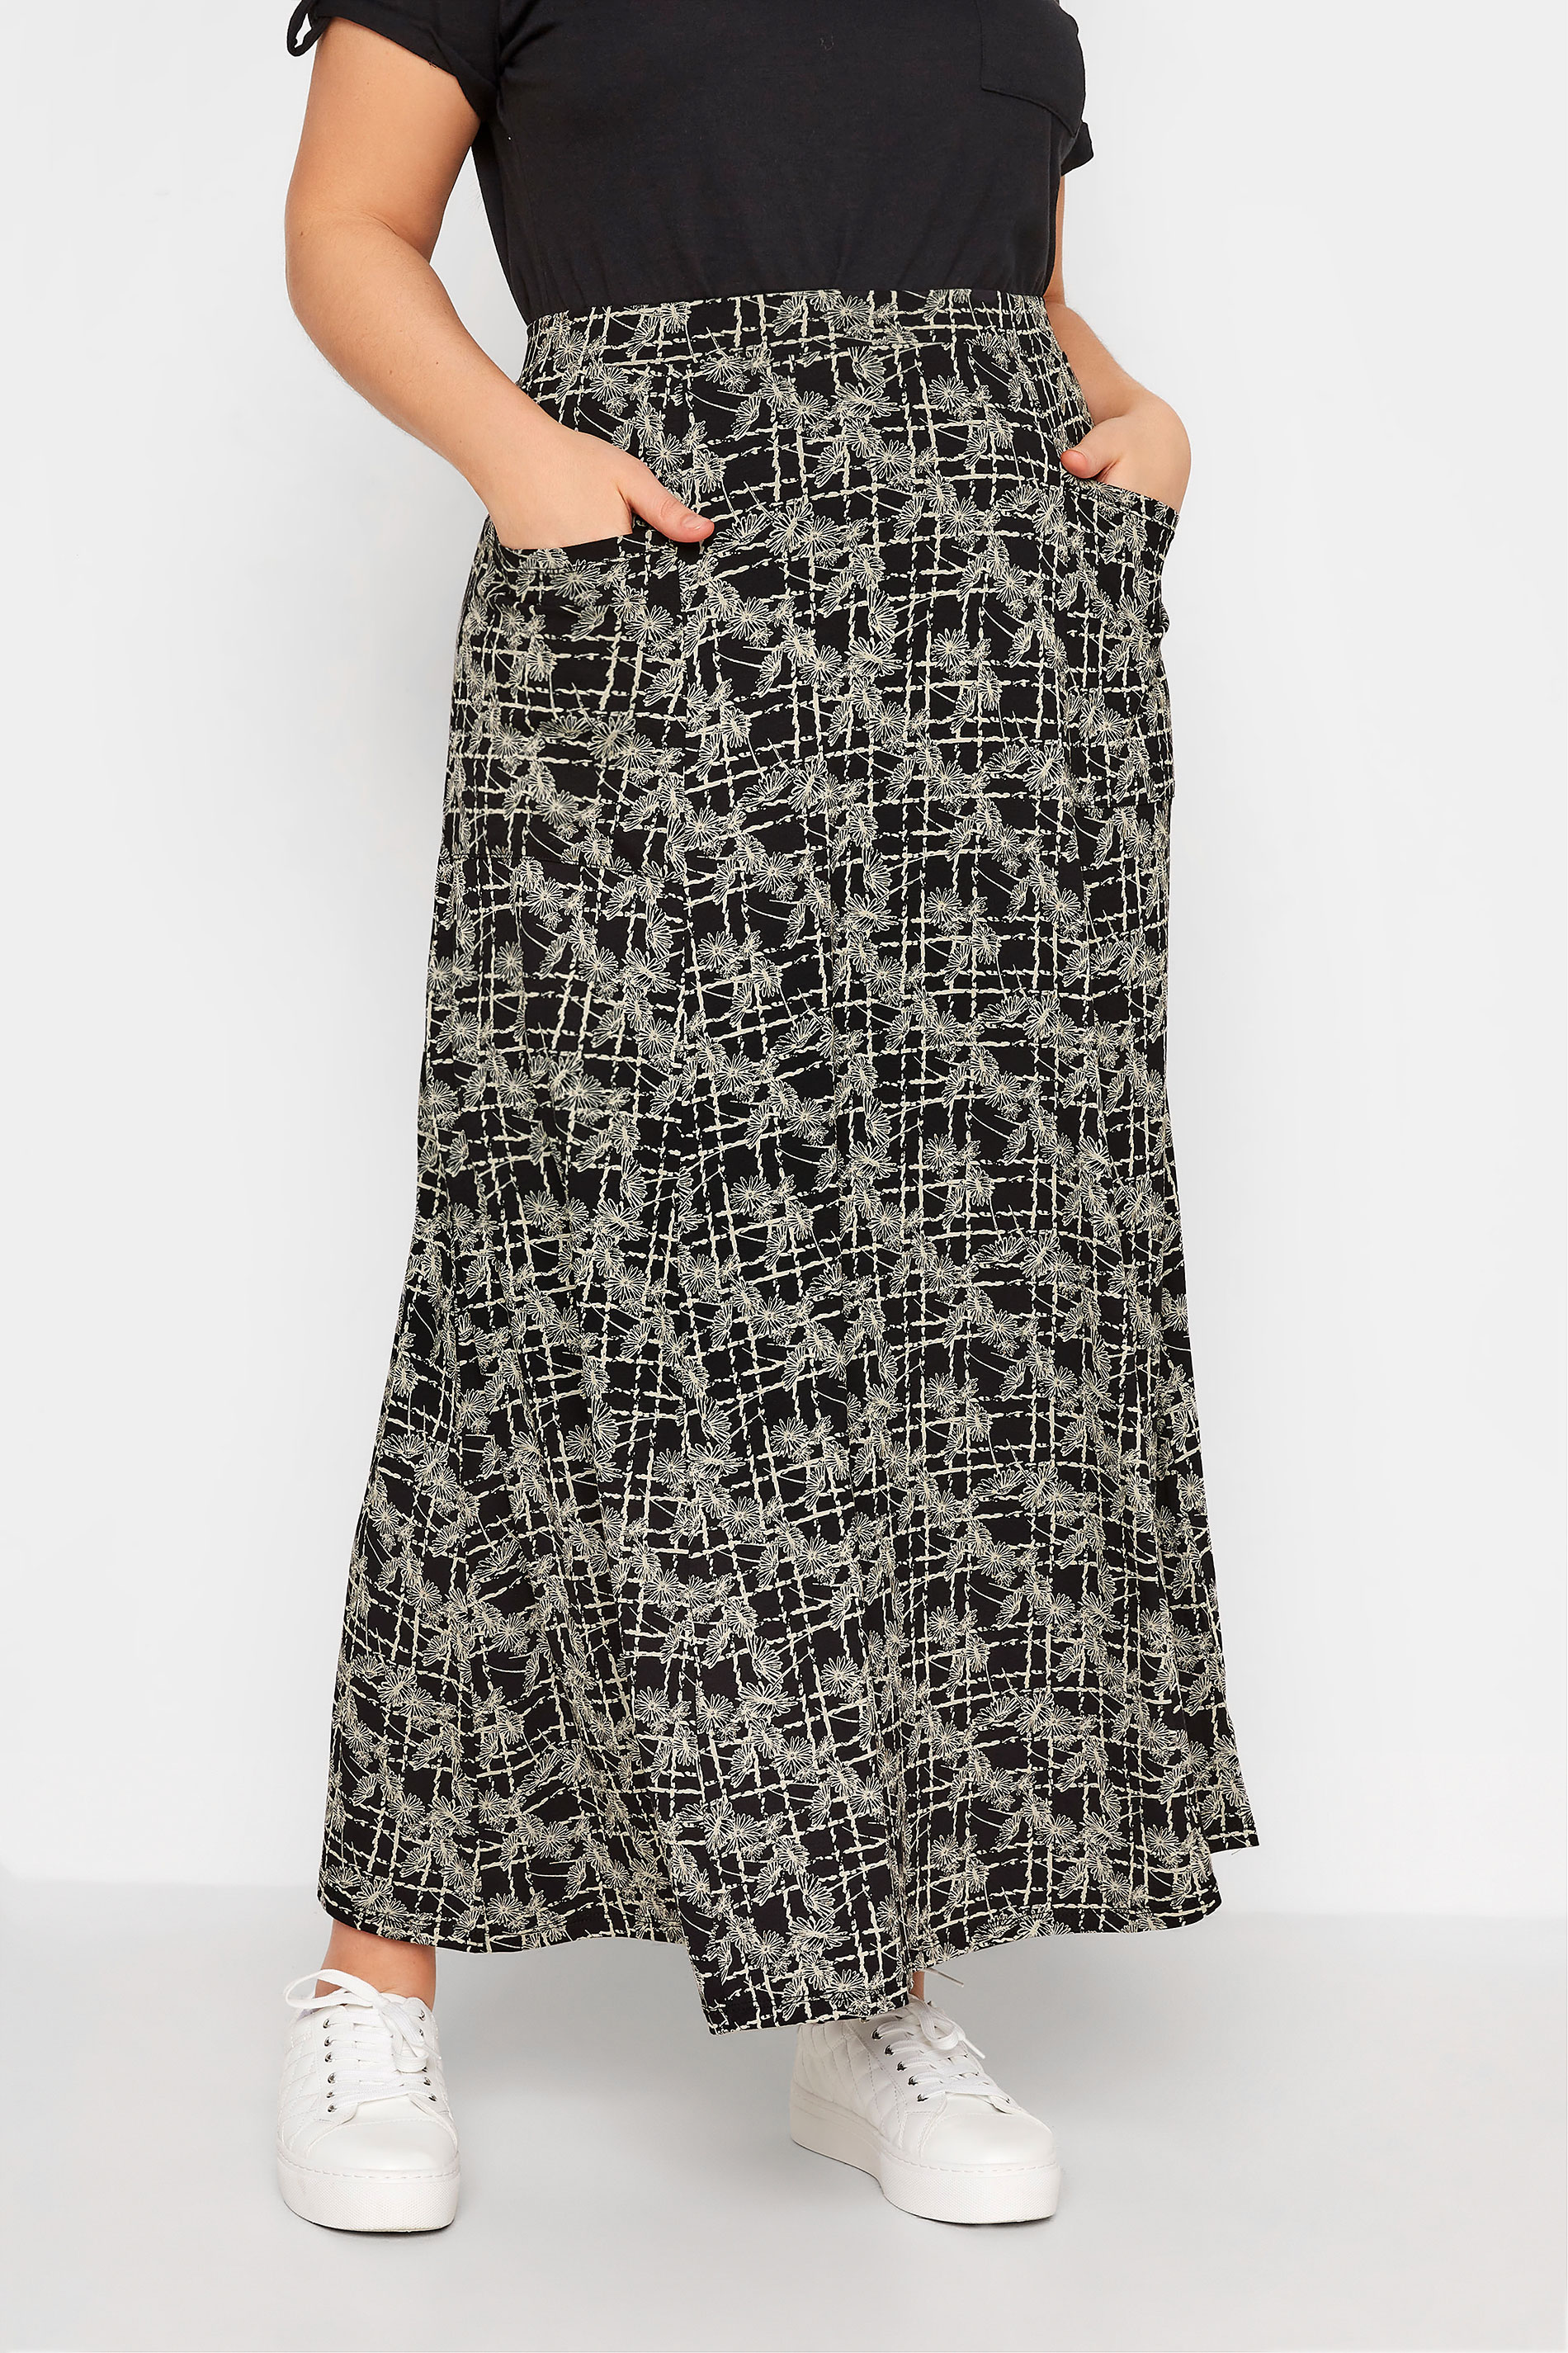 Plus Size Black Floral Print Maxi Pocket Skirt | Yours Clothing  1